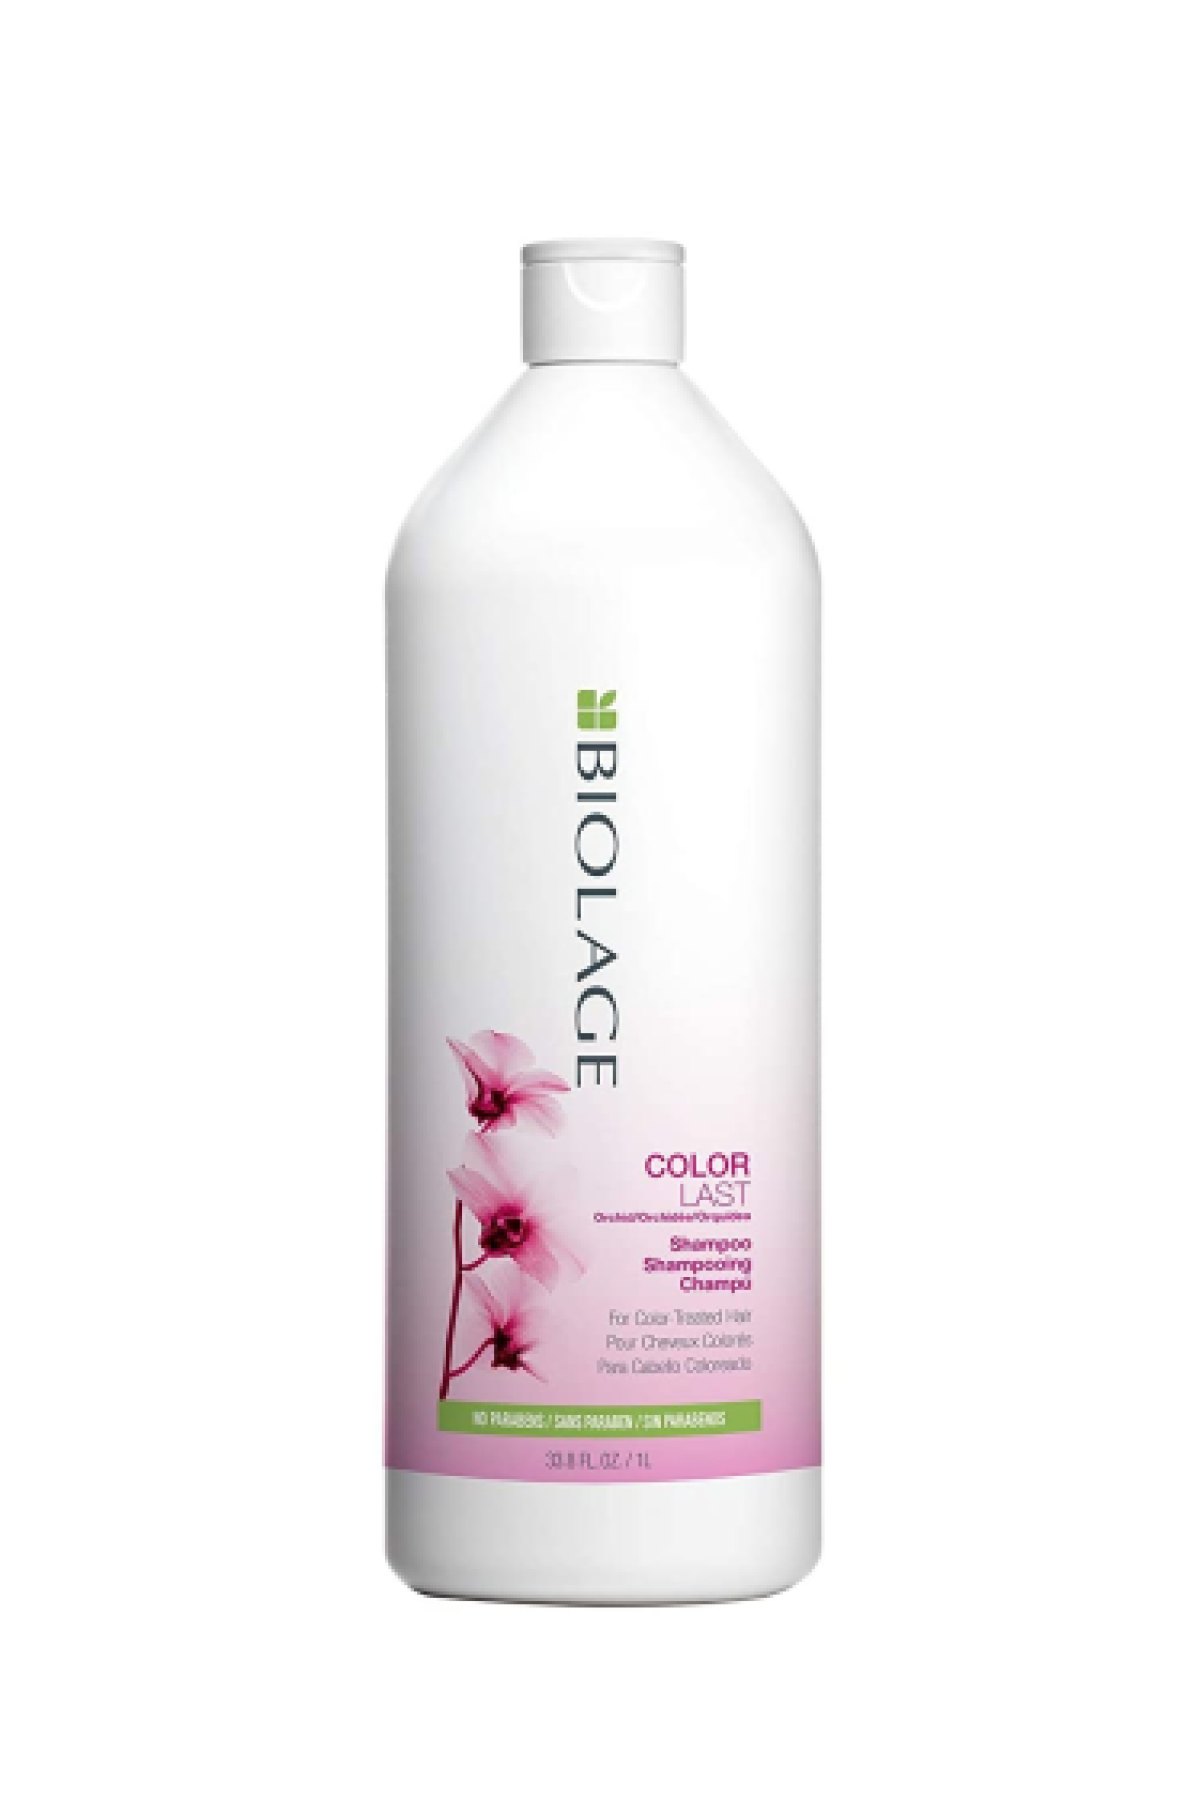 Top Rated Color-Safe Shampoos - Beauty and Hair Products